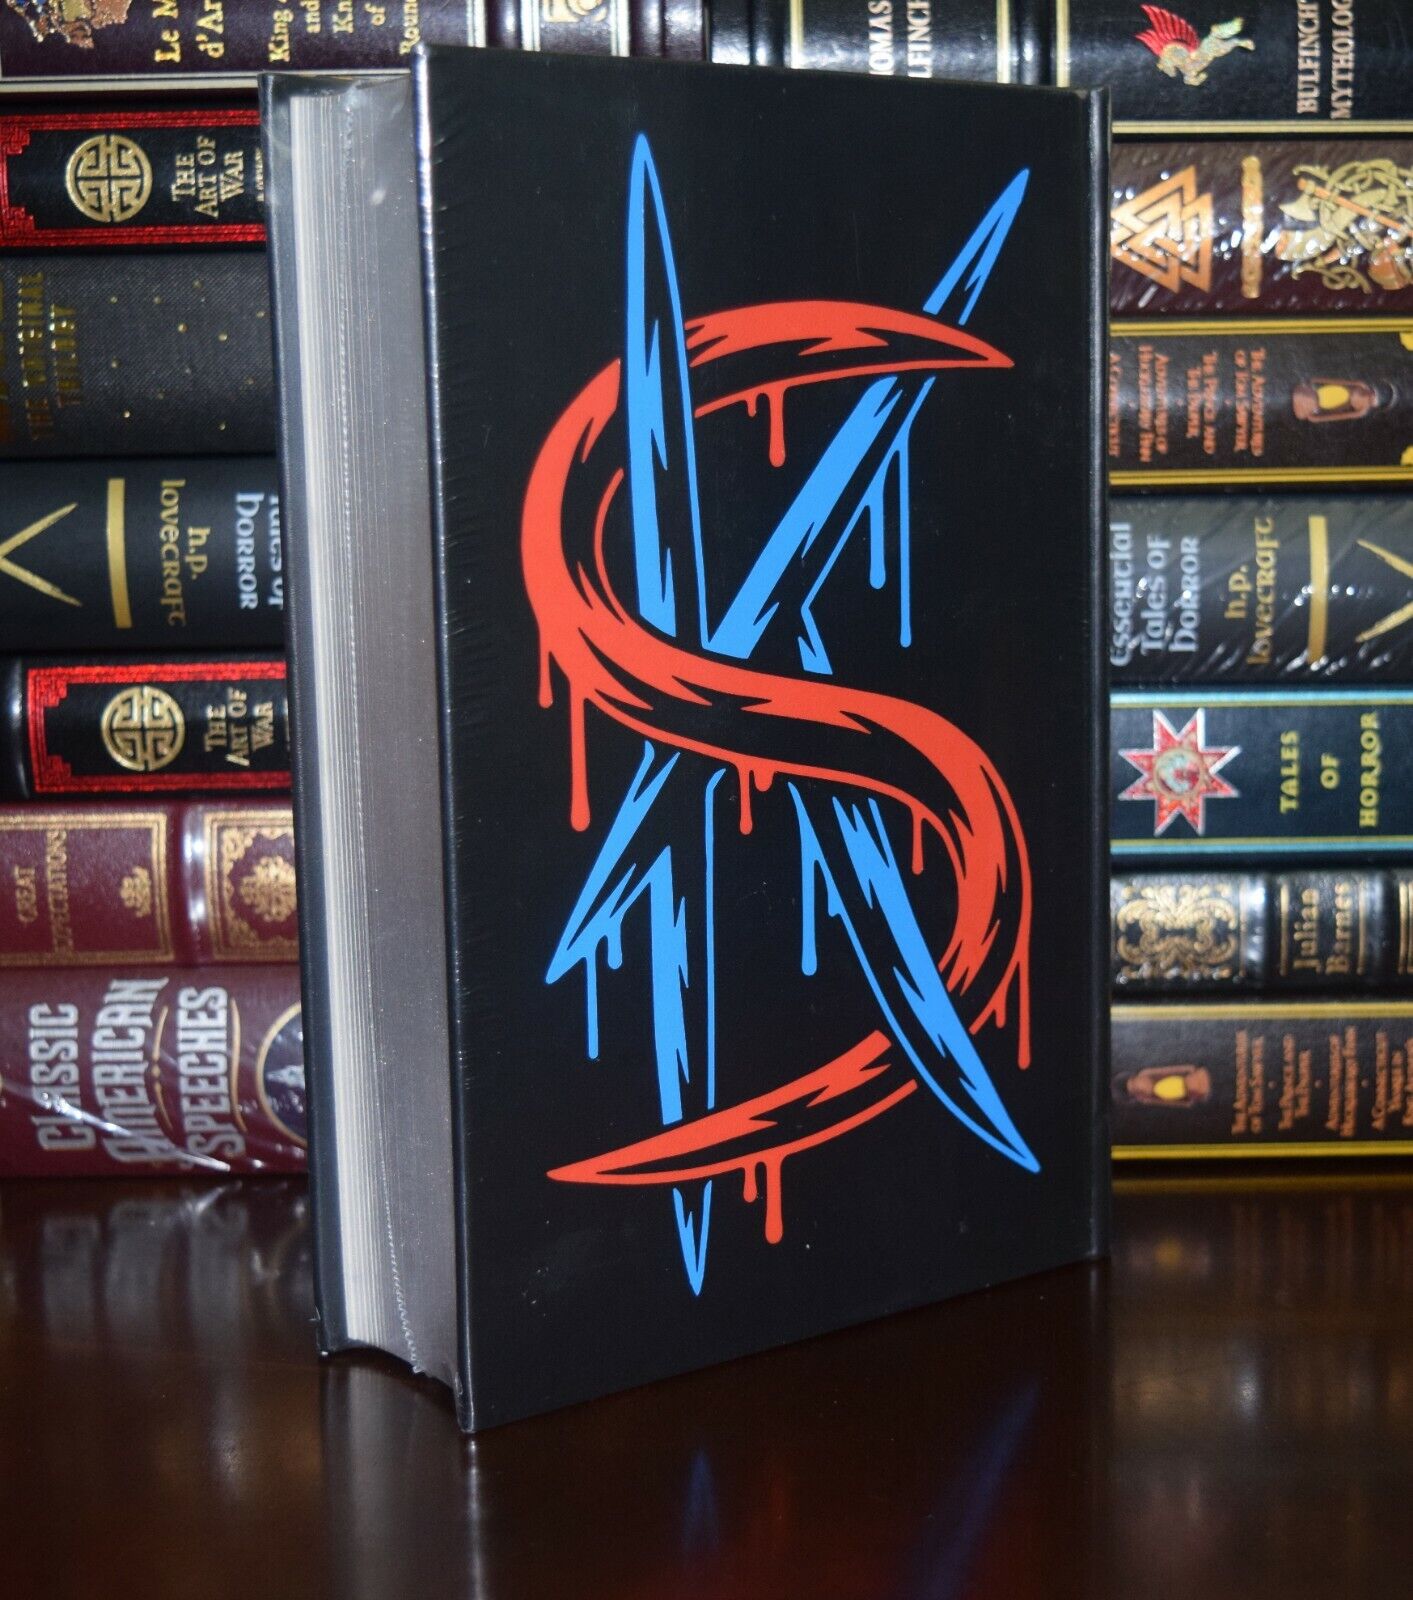 New Novels Stephen King Sealed Leather Bound Carrie Shining Salem's Lot Deluxe Без бренда - фотография #3